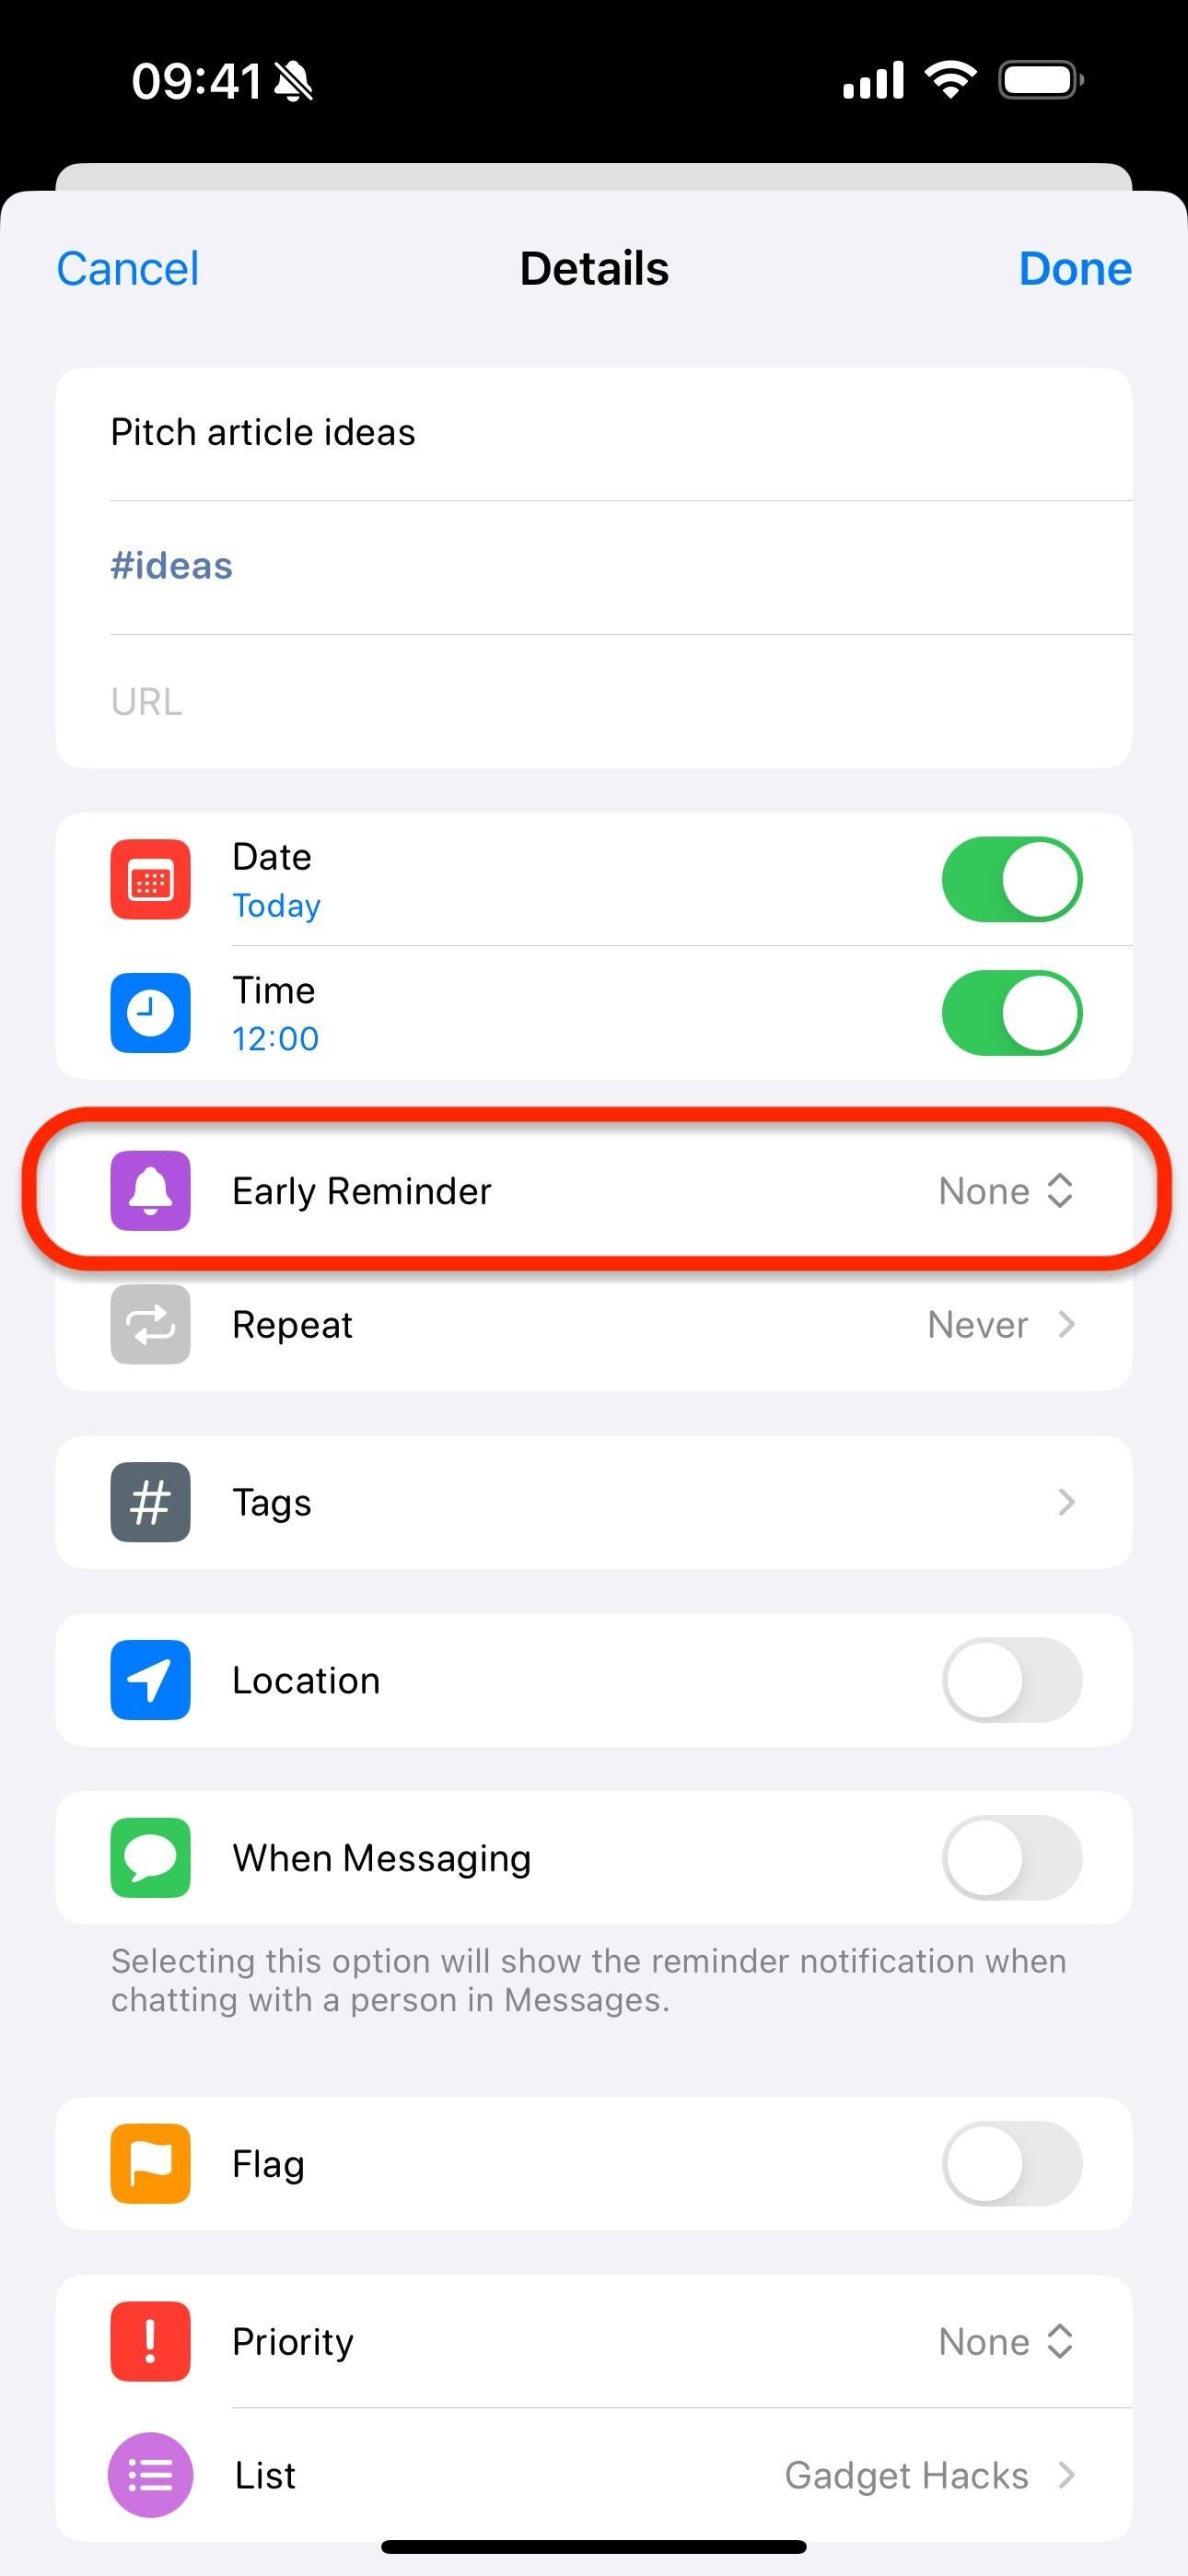 Apple Finally Lets You Set Early Notifications for Reminders to Get Custom Alerts Before Tasks Are Due